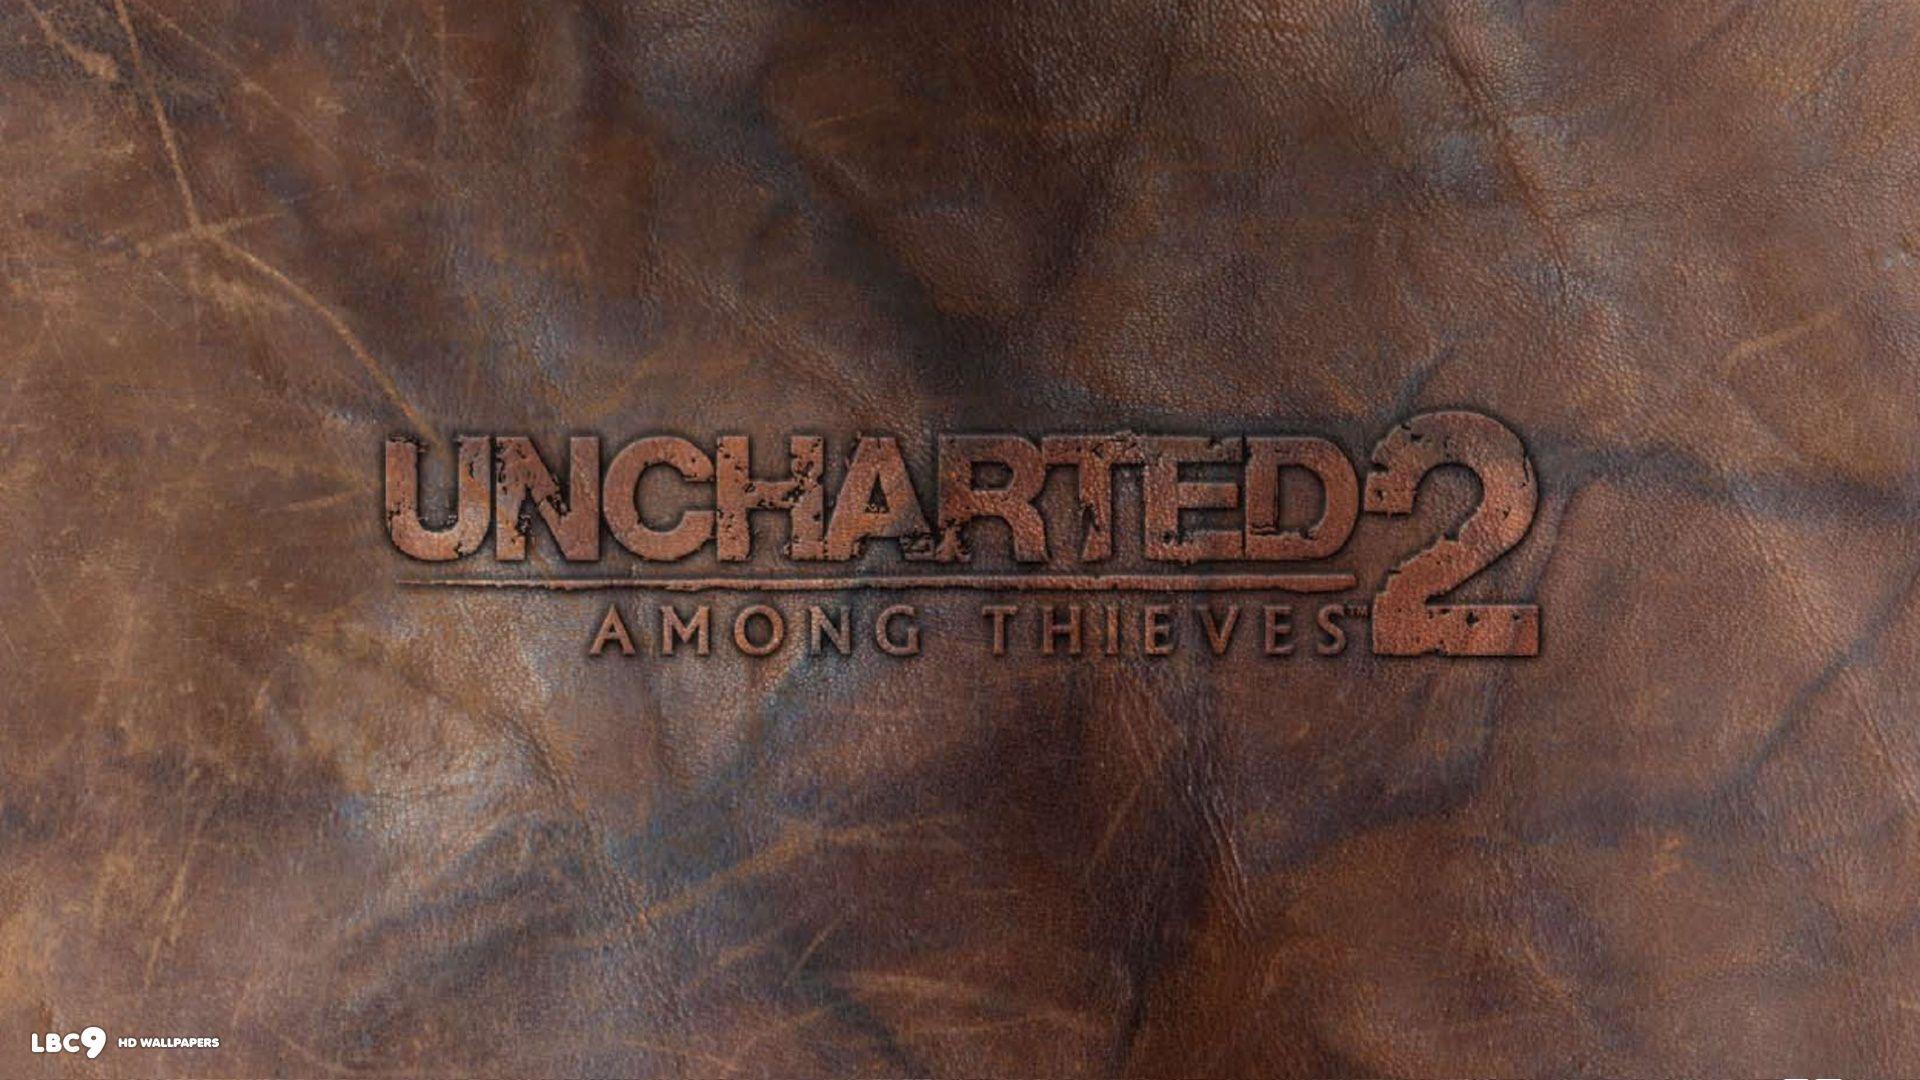 Uncharted 2 Among Thieves Wallpaper 2 8. Action Adventure Games